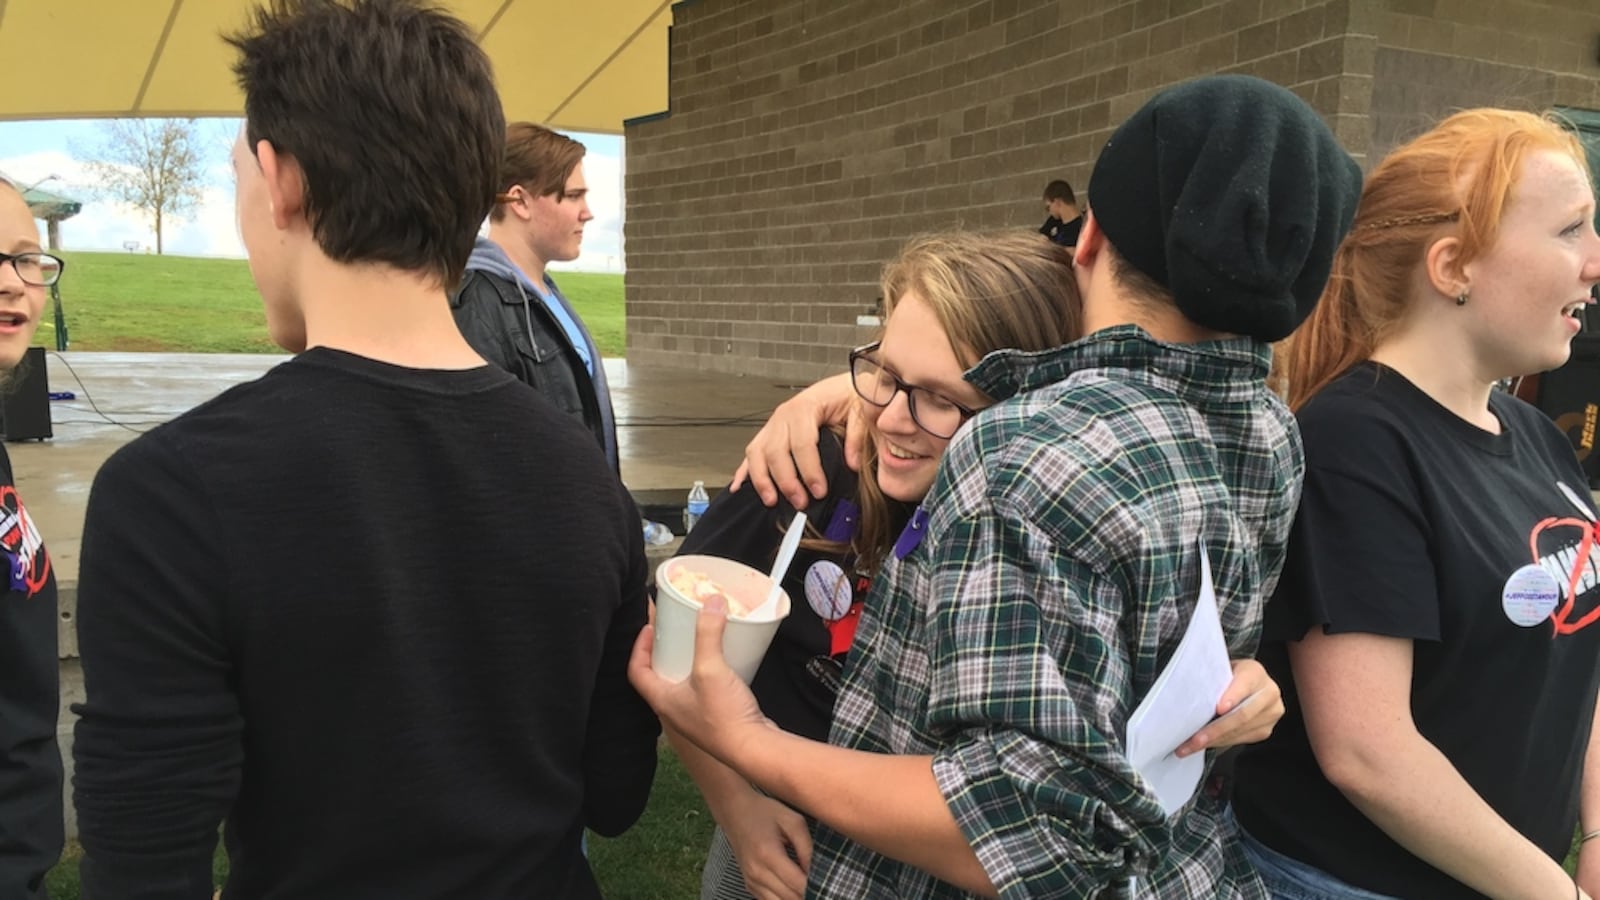 Evergreen High School student Mali Holmes, center, gets a hug from a fellow student after she spoke at a rally, organized by students, to gauge interest in a possible recall of three Jefferson County board members.